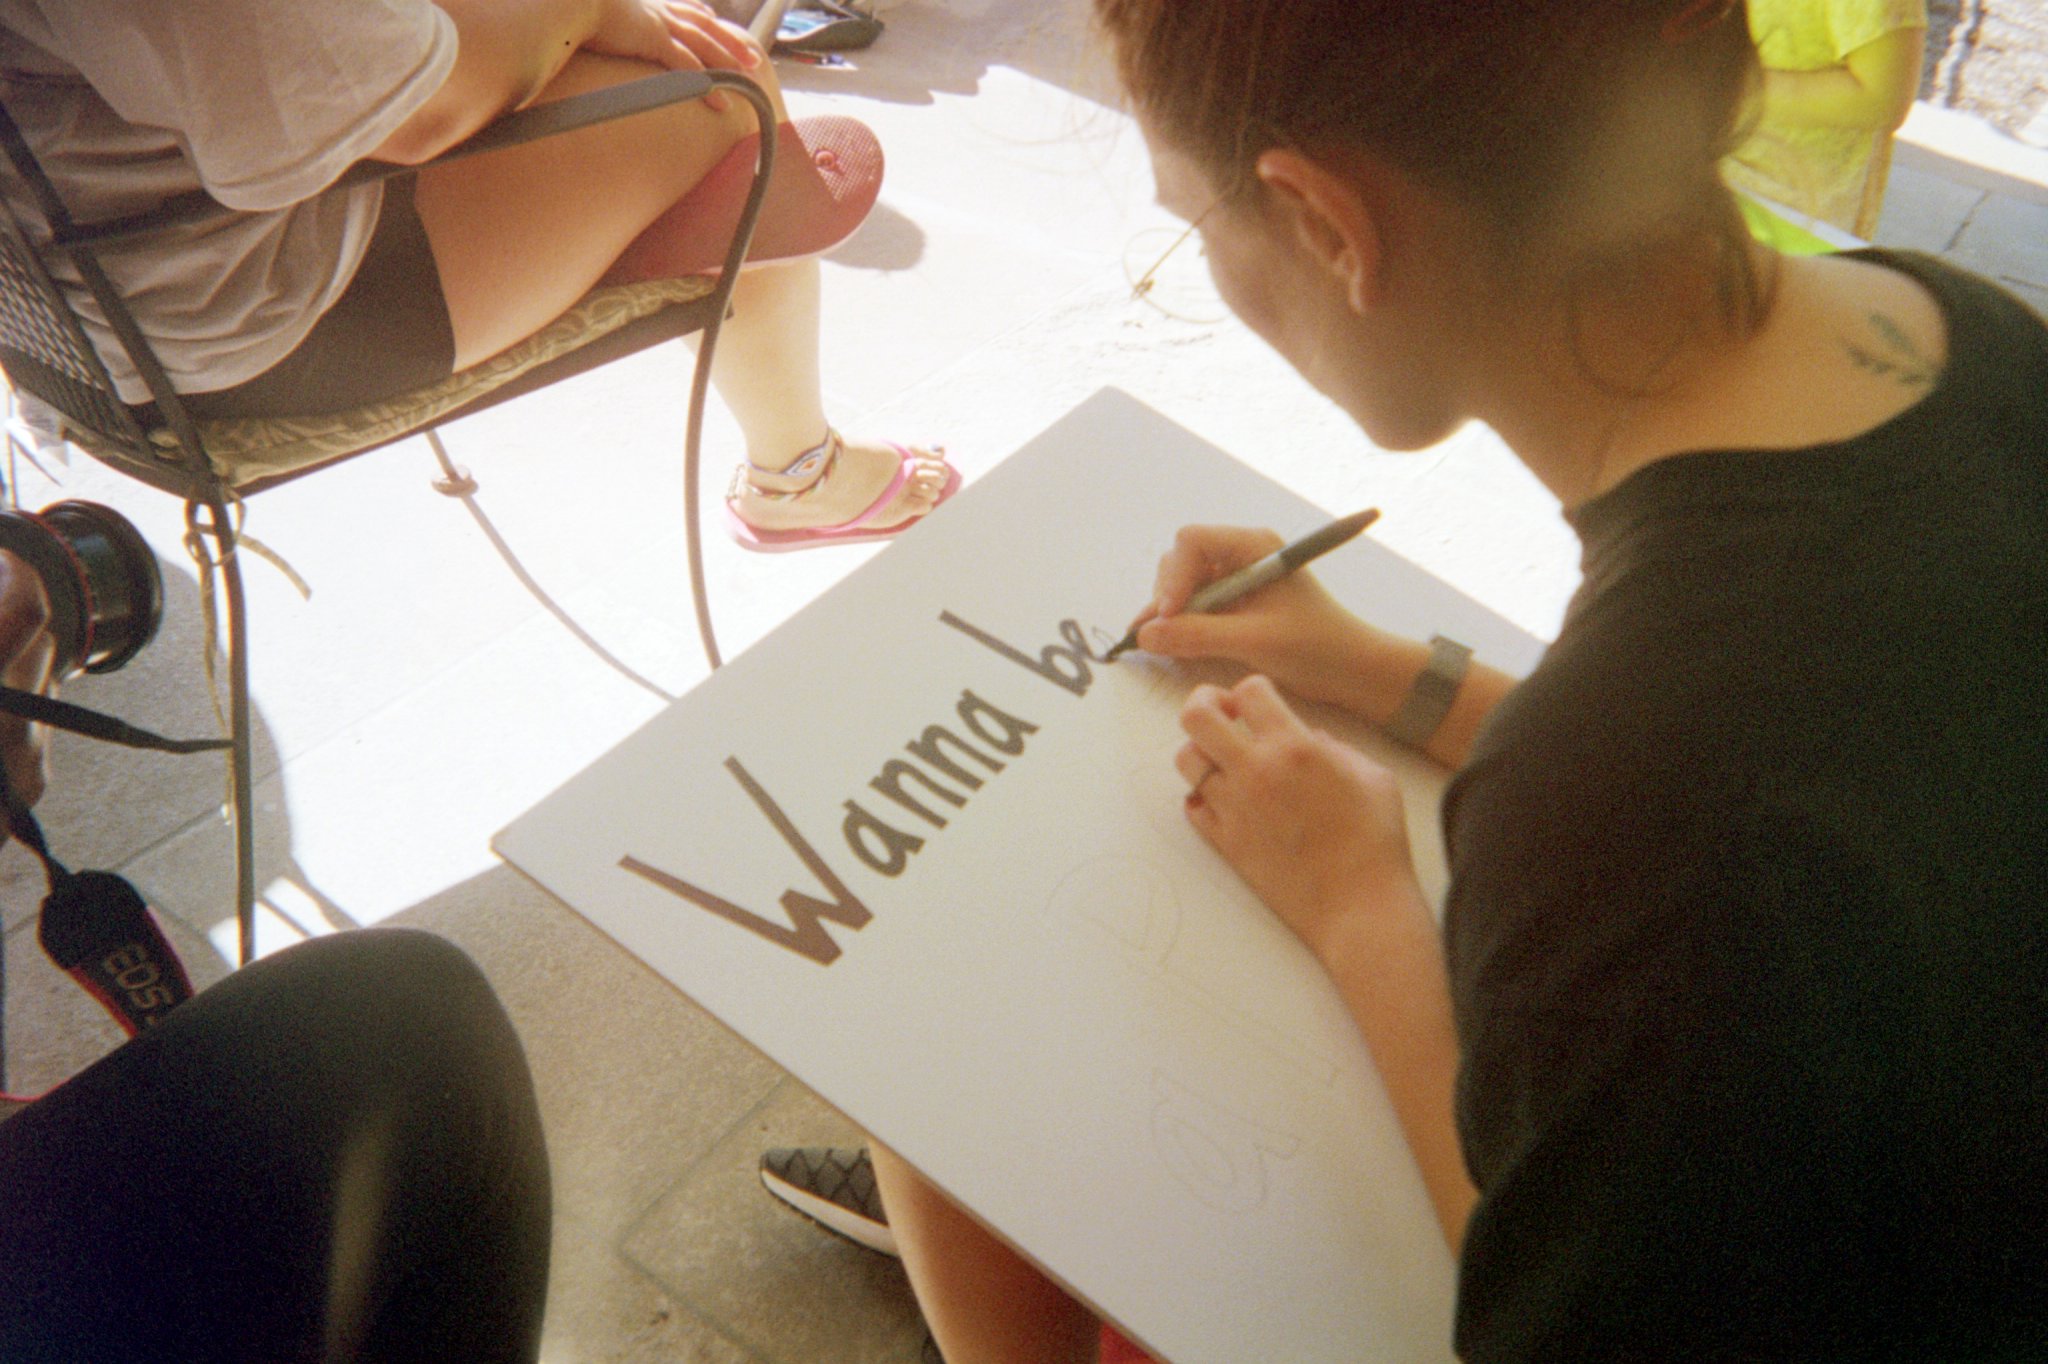 Althea working on a sign. She's filling in the "e" in "Wanna be in our podcast?"